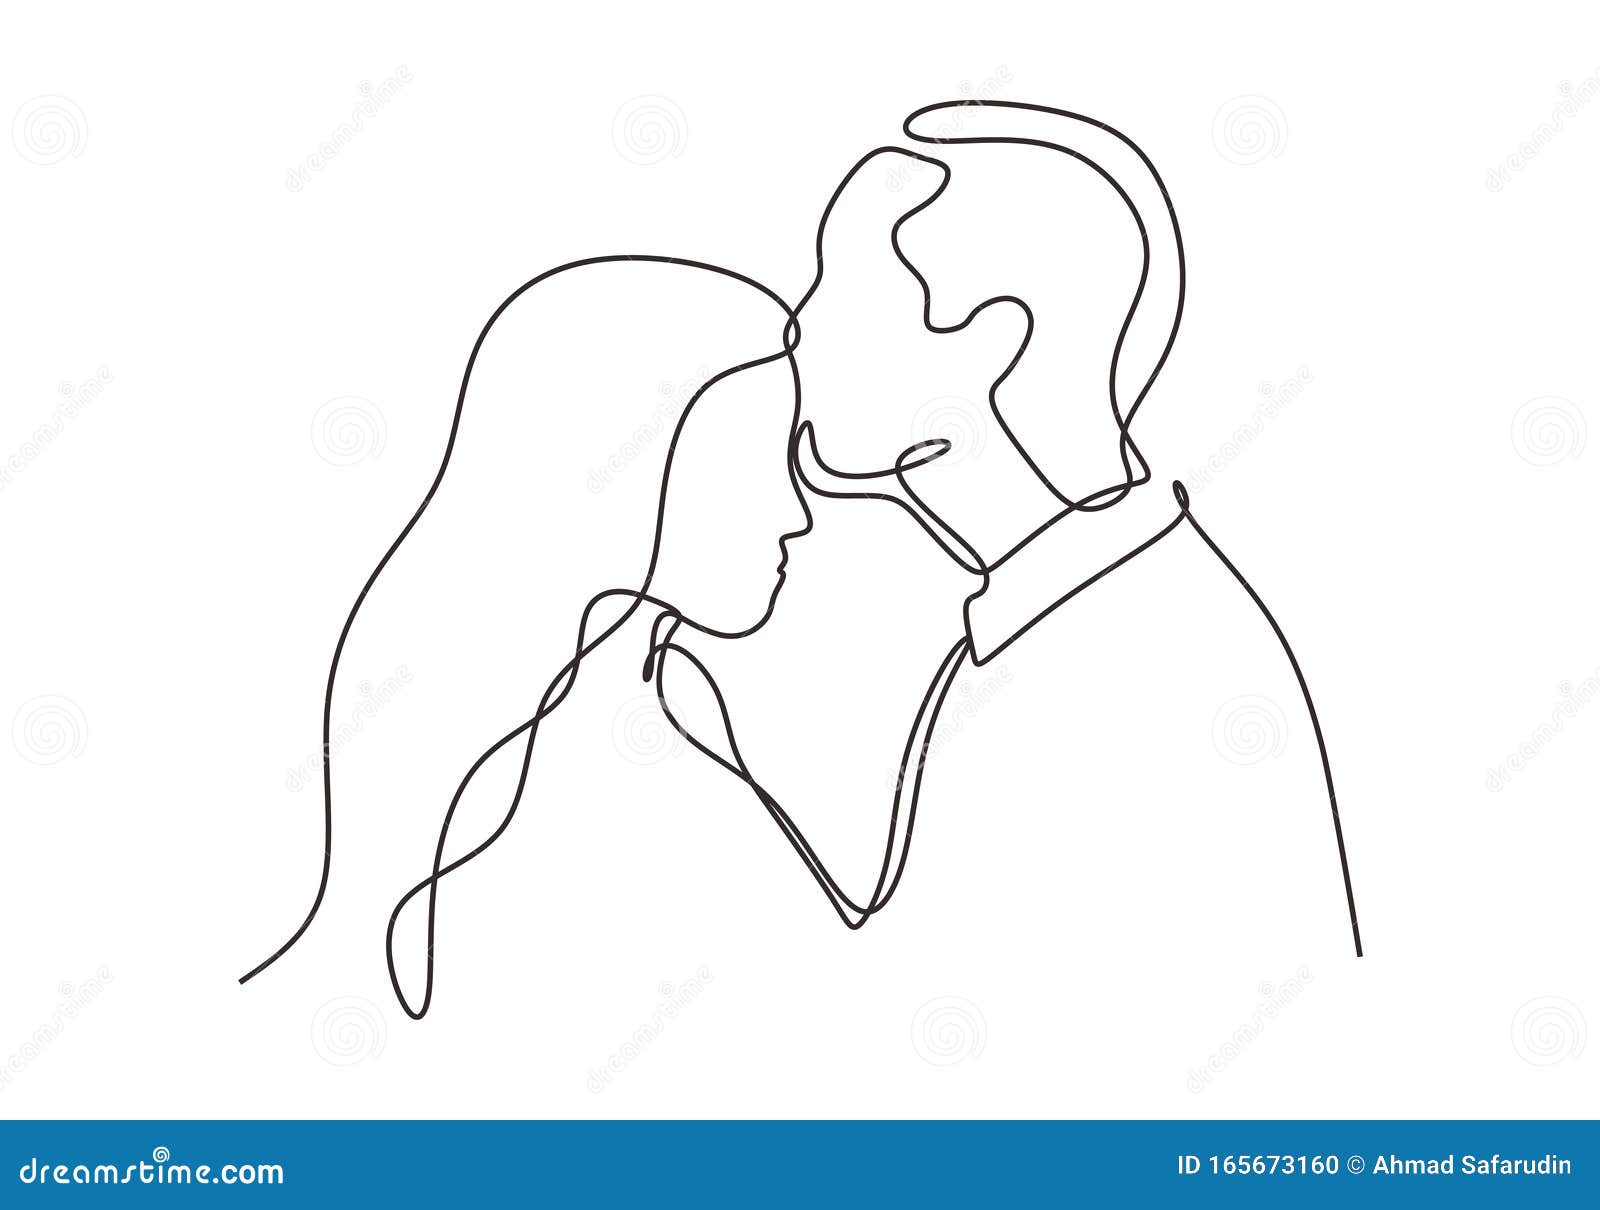 continuous one line drawing of couple in love. man kiss to a girl or woman in romantic situation.  minimalism 